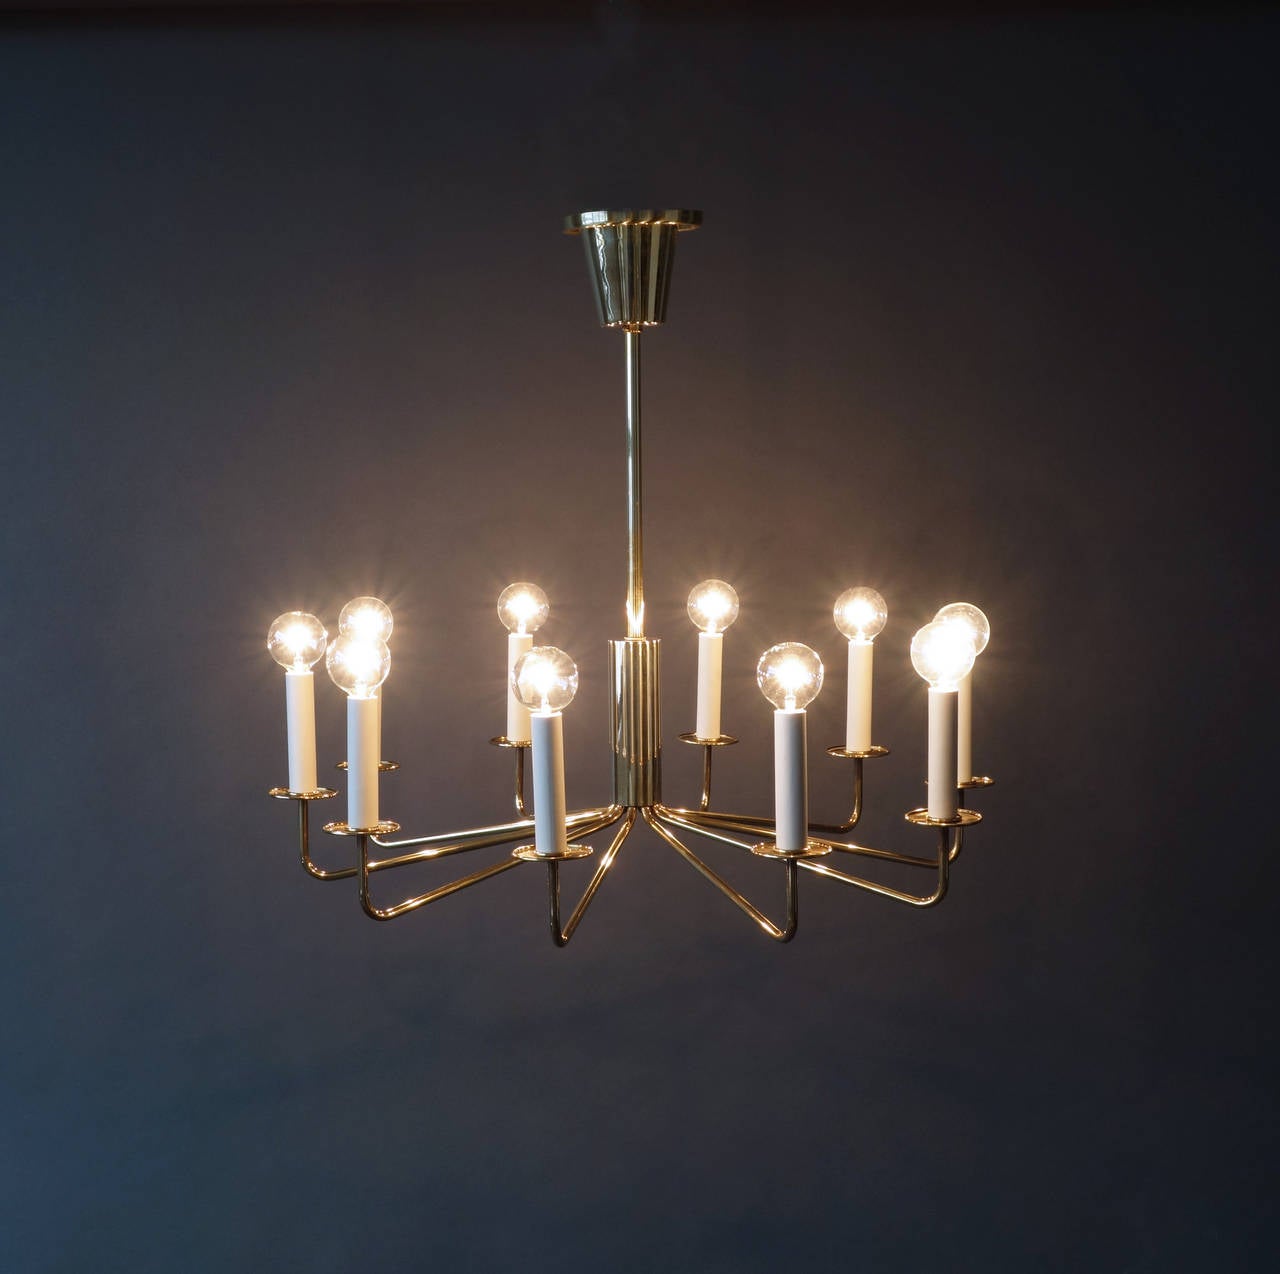 An elegant ten-light chandelier. Modern, yet at home with any era.